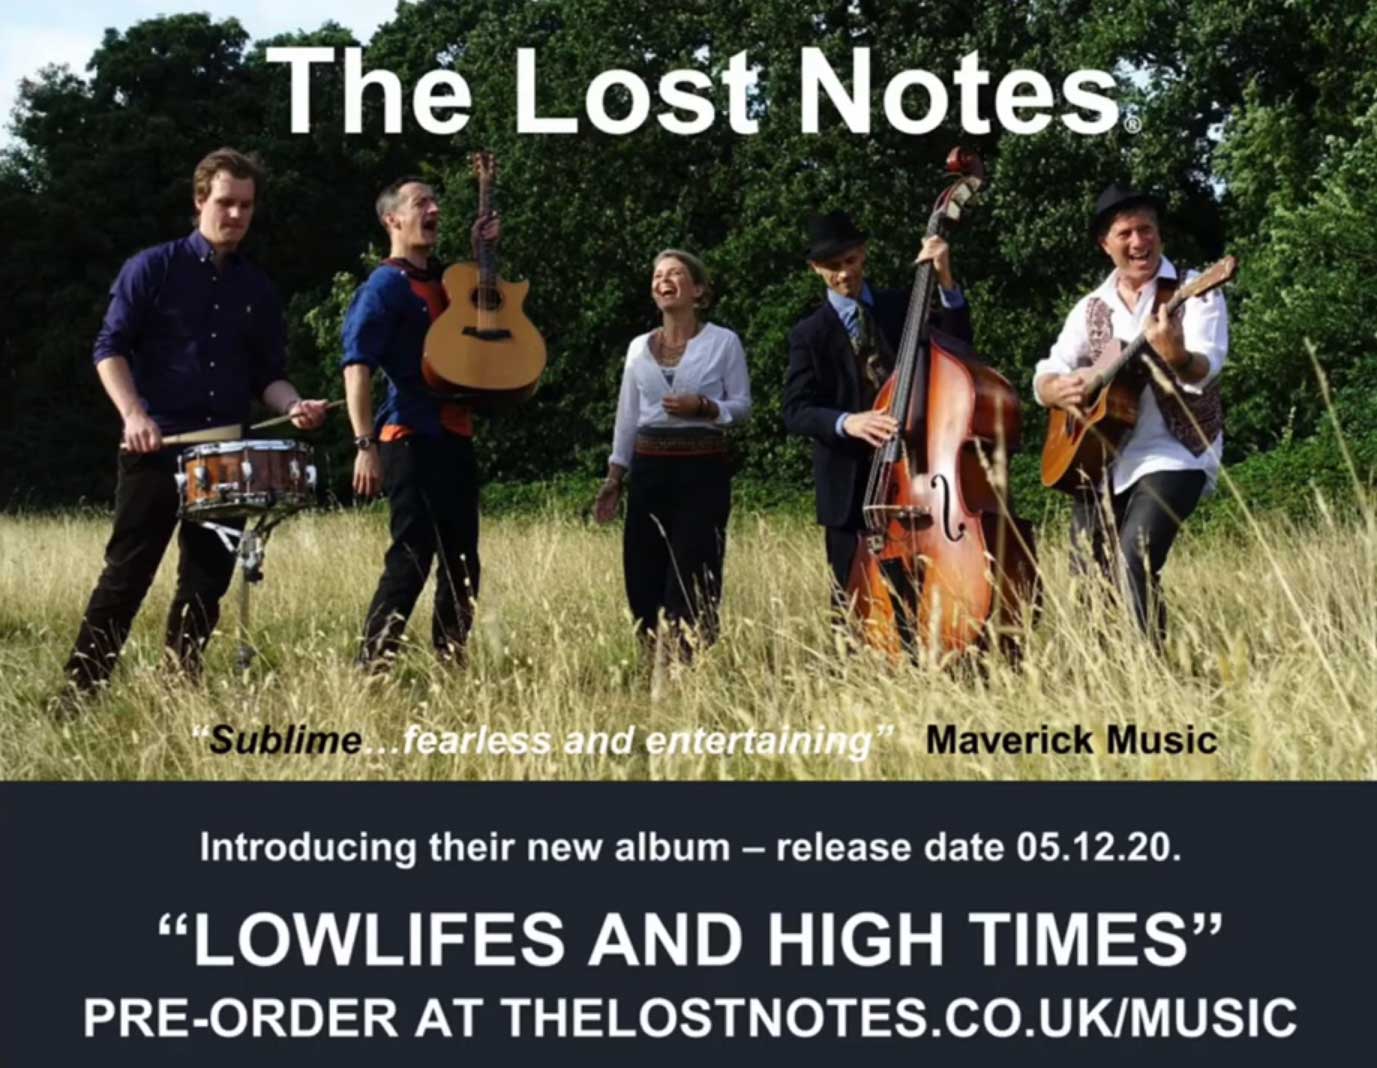 The Lost Notes Lowlifes & high times